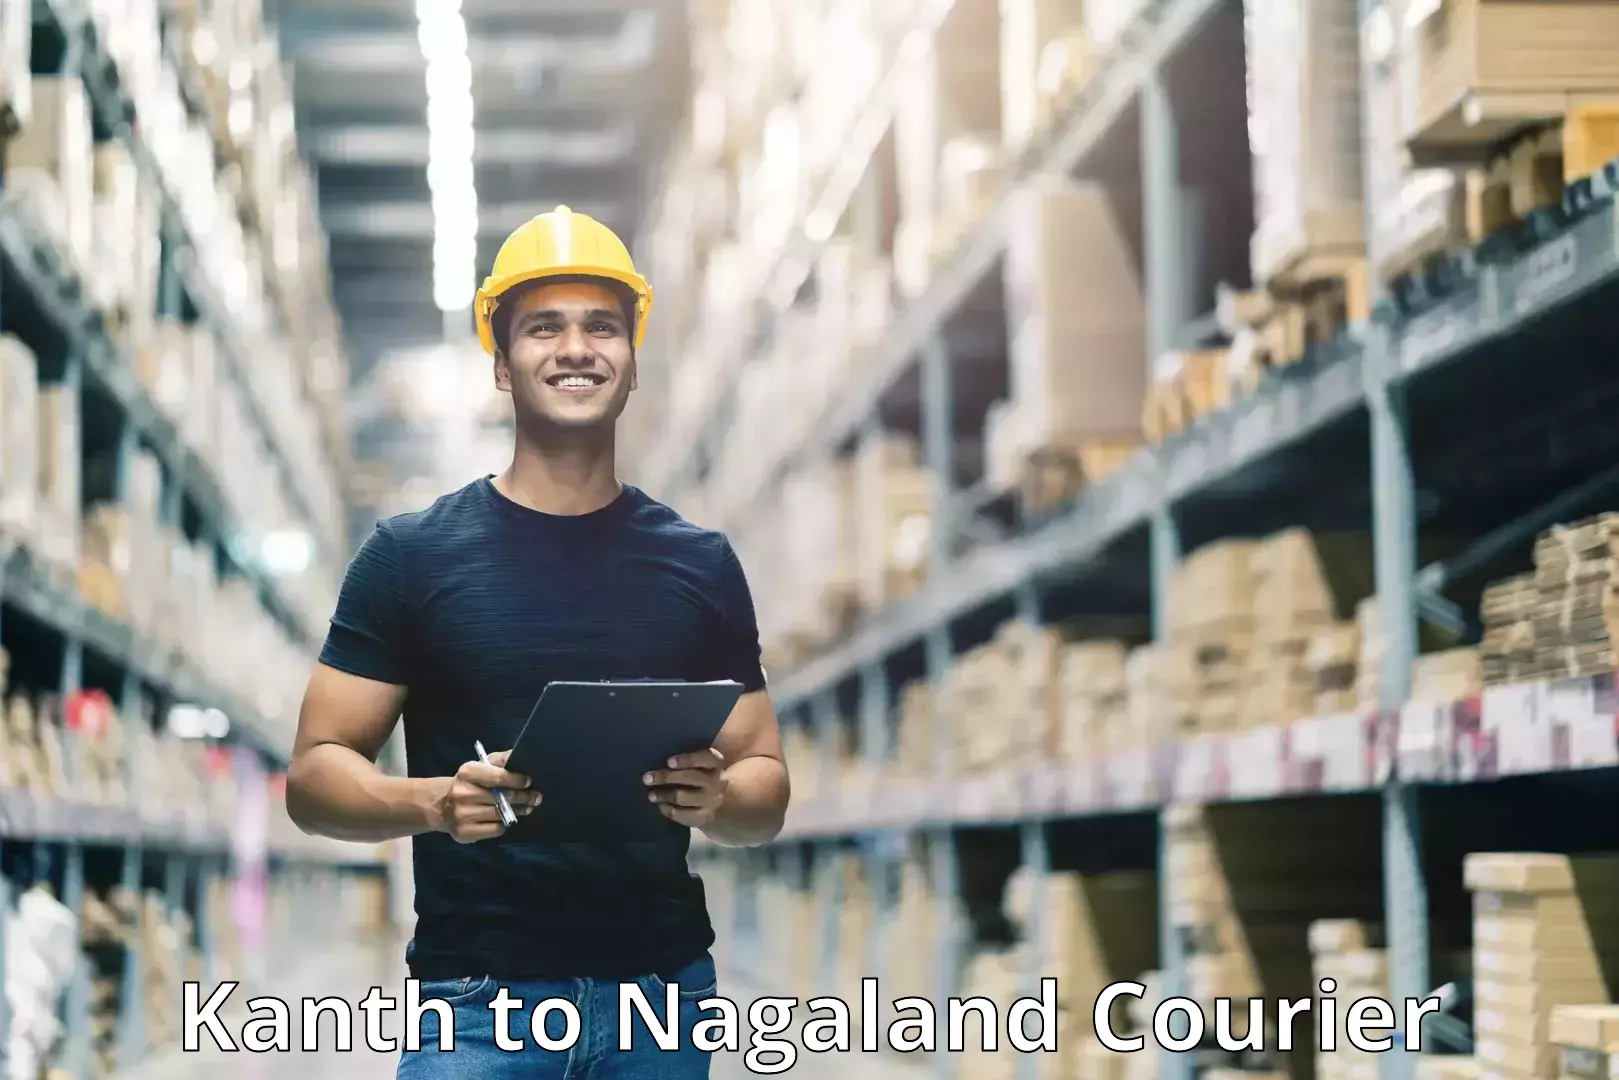 Reliable logistics providers Kanth to Nagaland